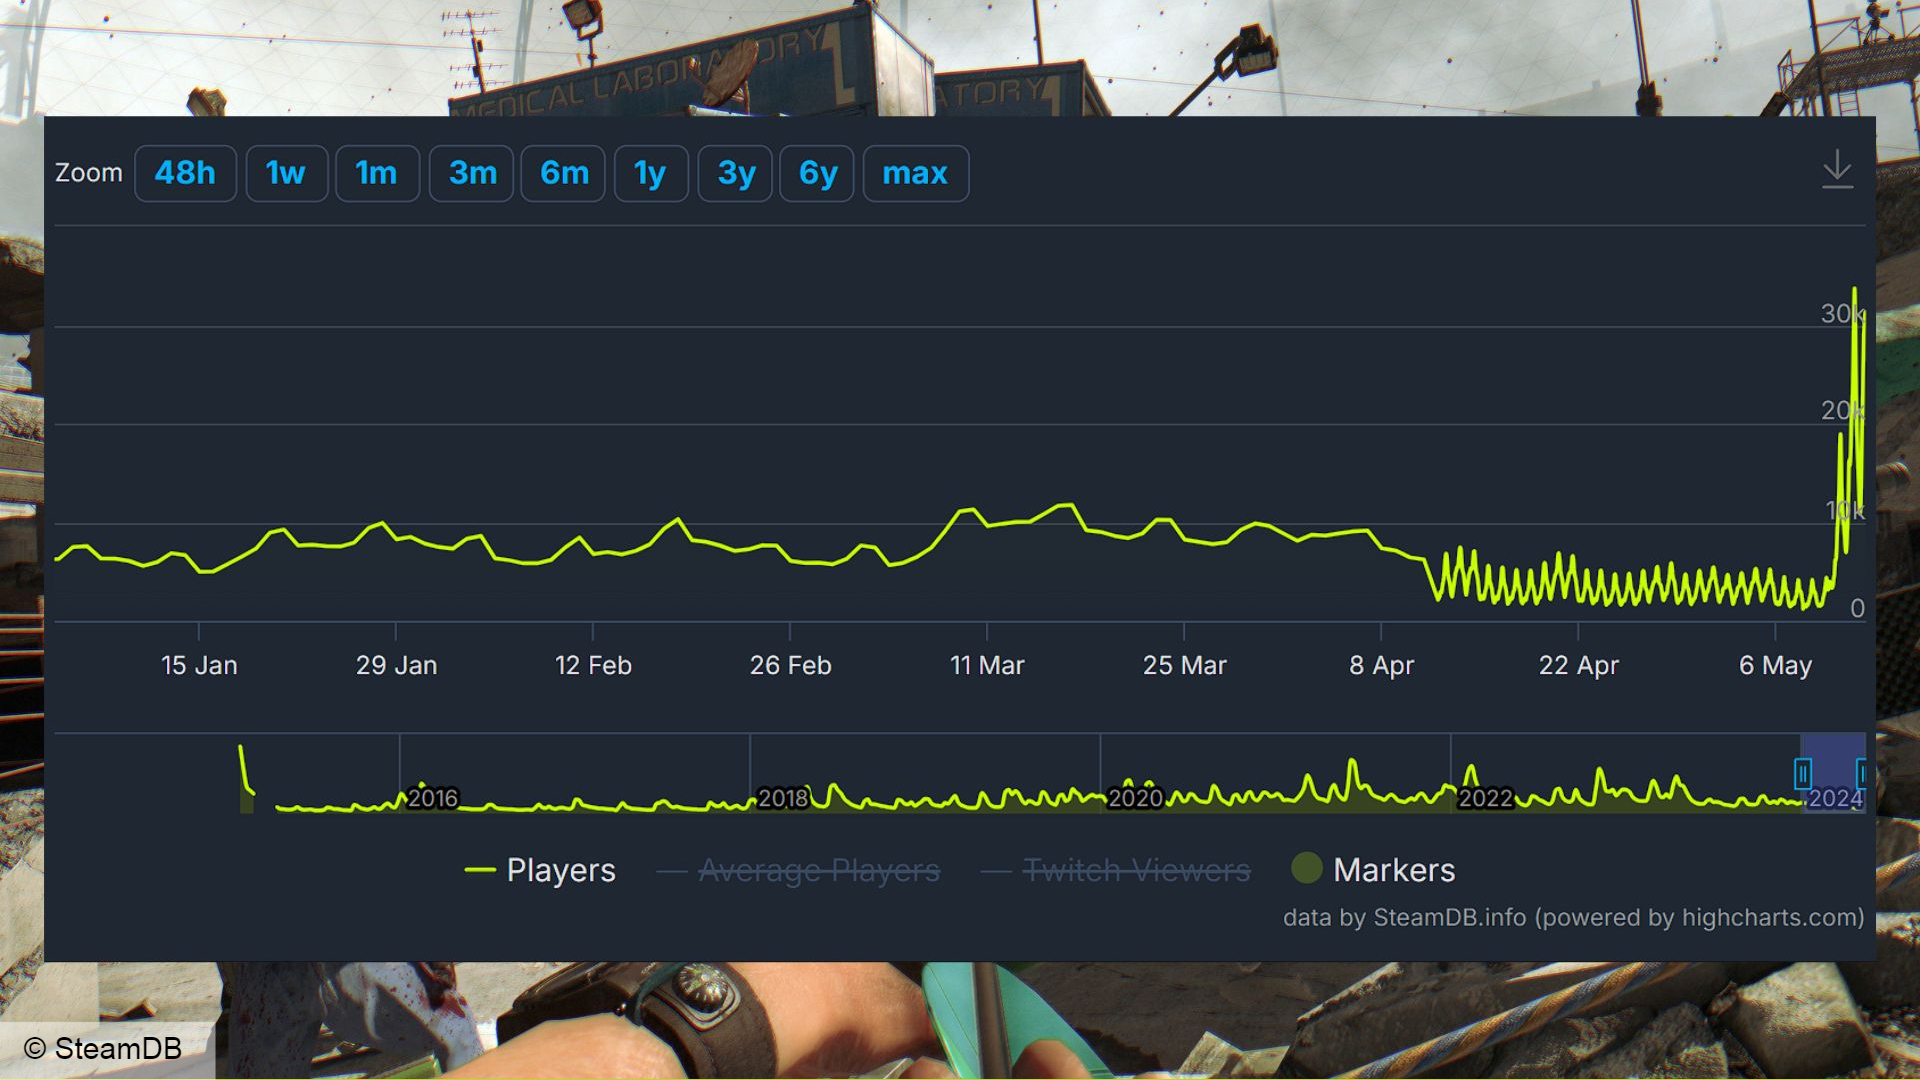 Dying Light Steam players: a SteamDB chart of Dying Light players